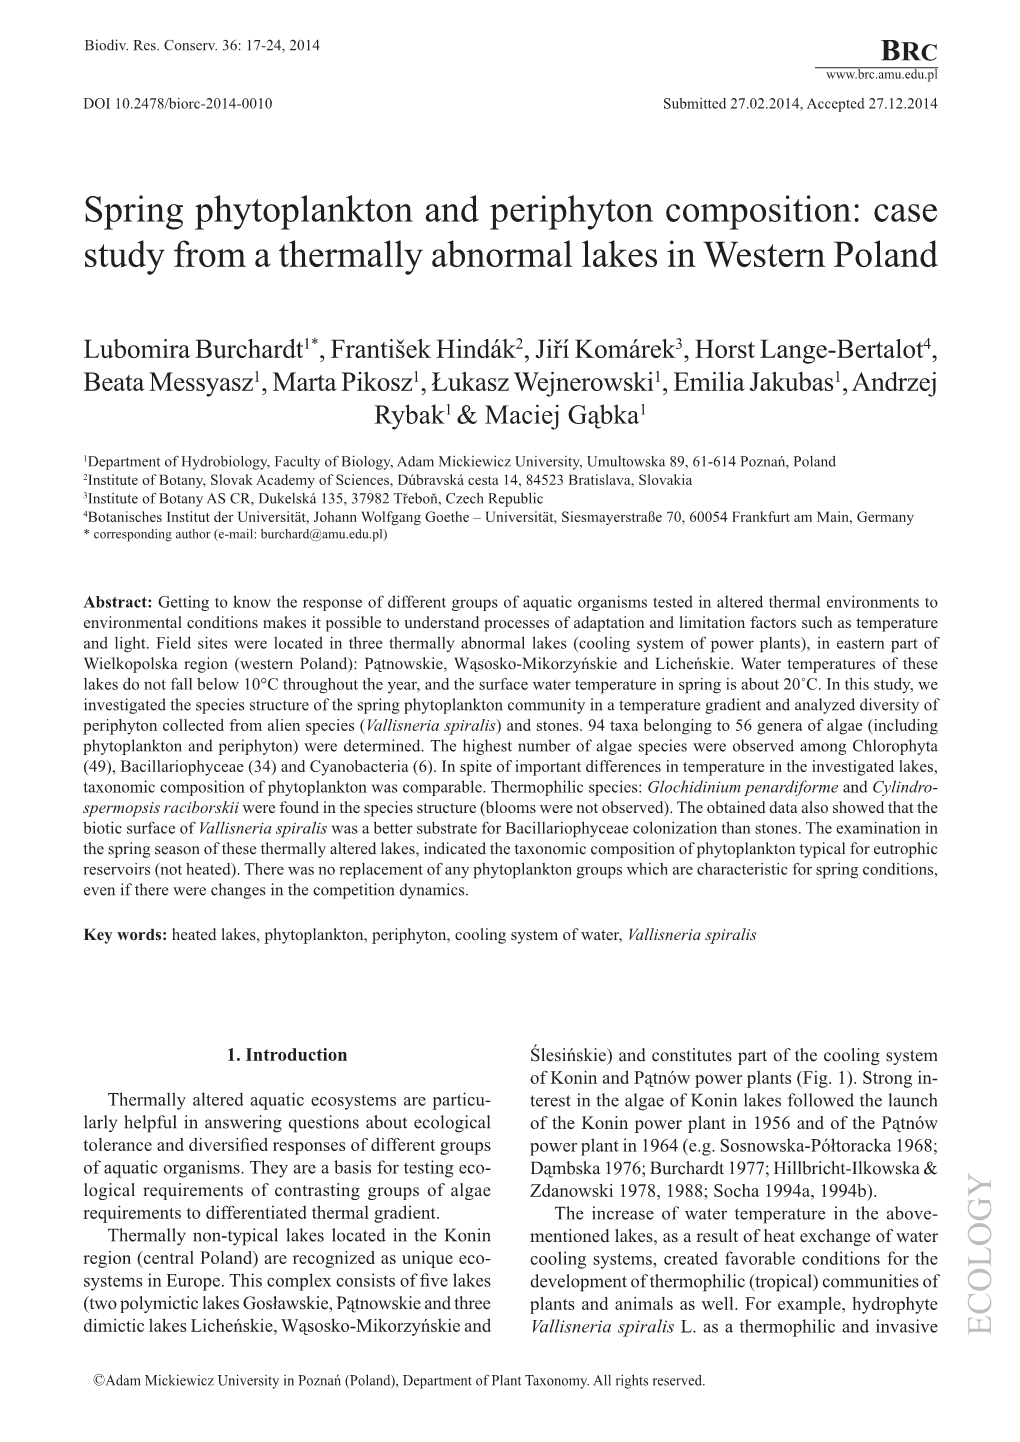 Spring Phytoplankton and Periphyton Composition: Case Study from a Thermally Abnormal Lakes in Western Poland